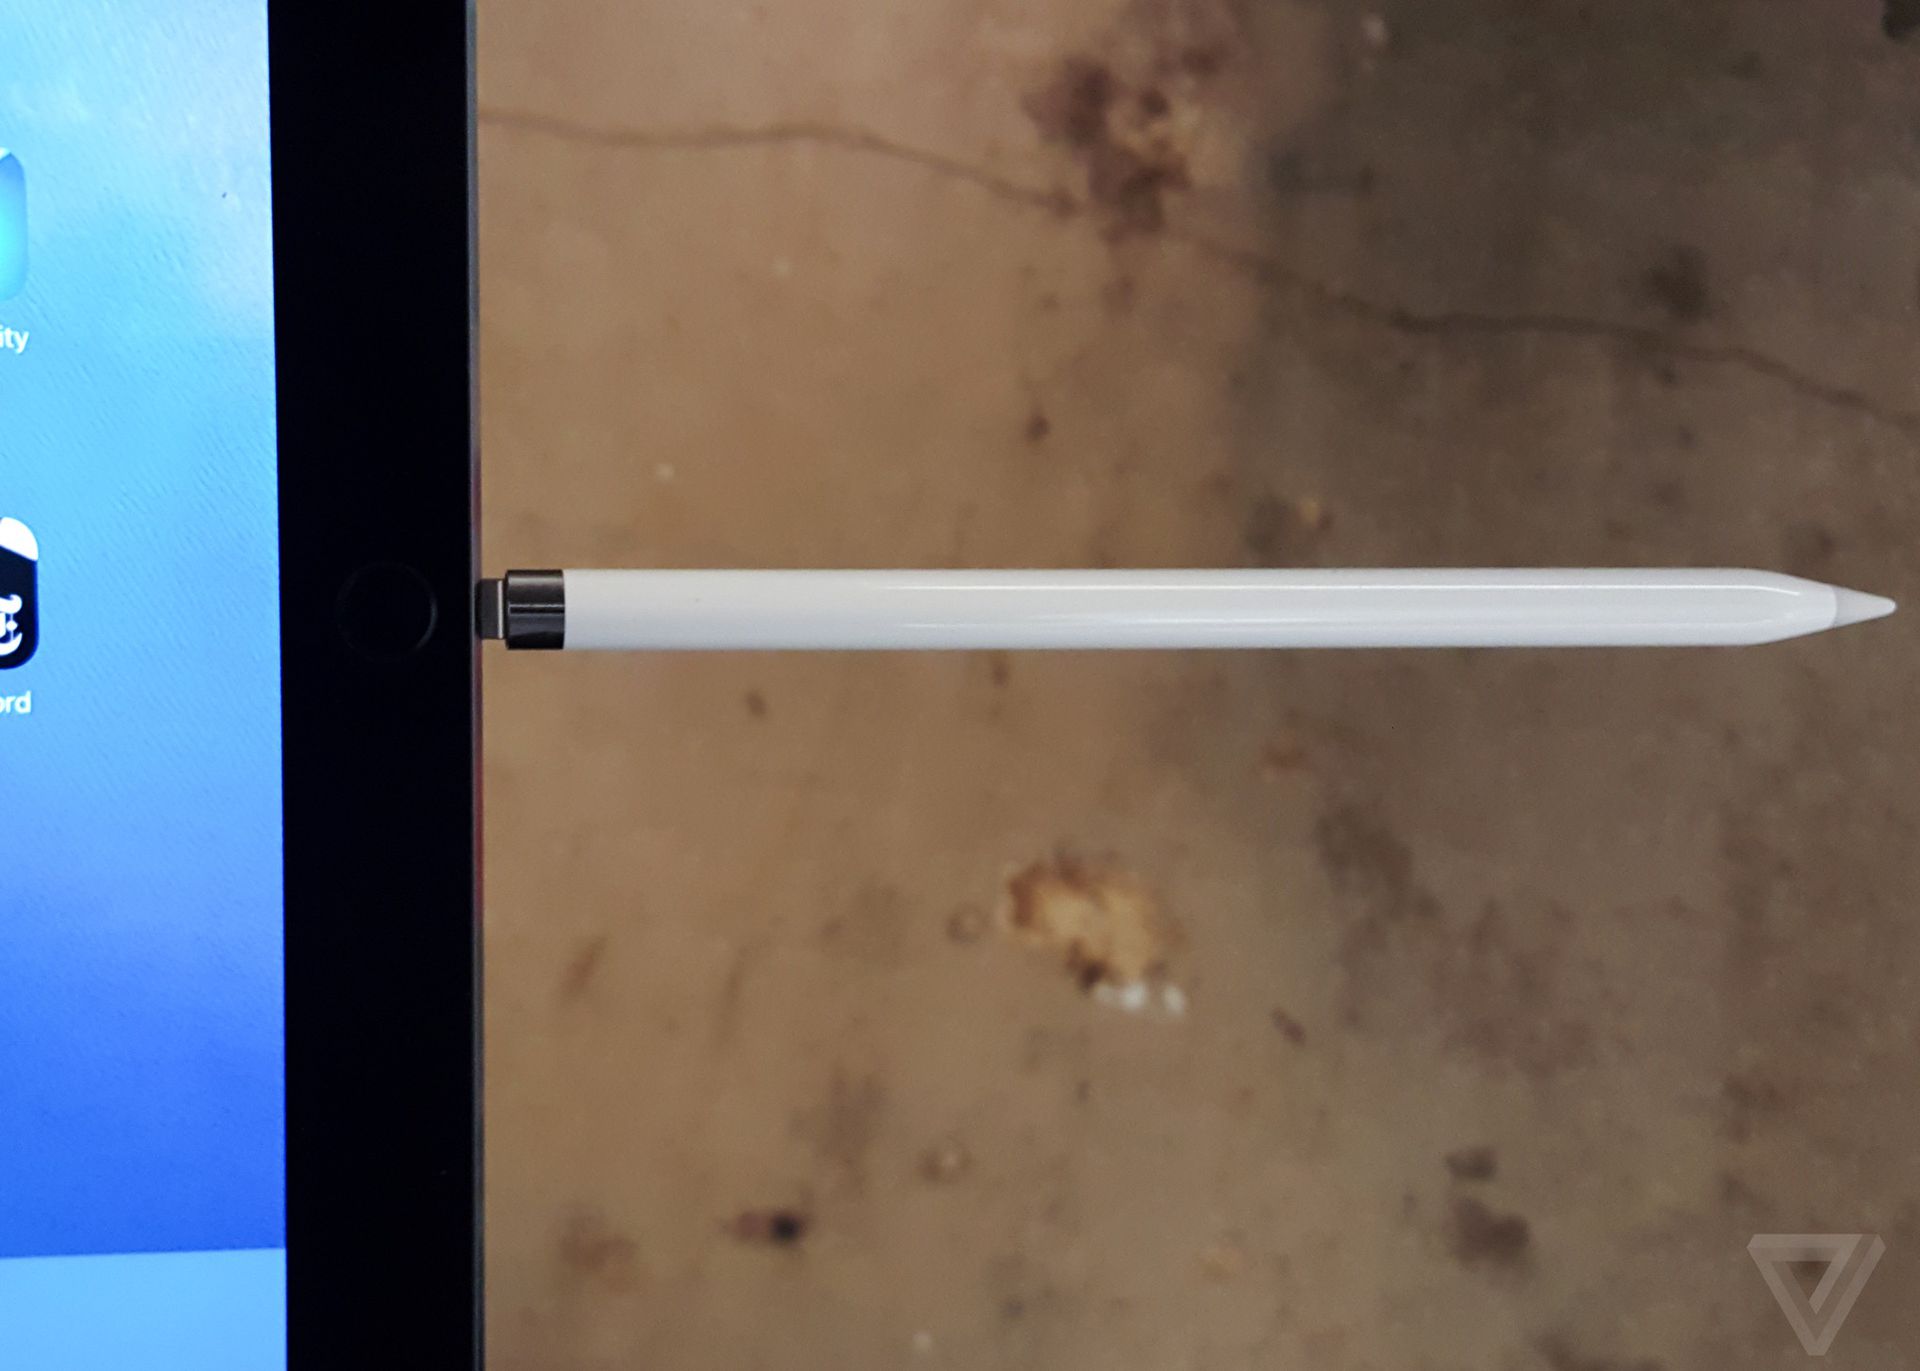 Apple announces entry-level Apple Pencil with USB-C charging - The Verge